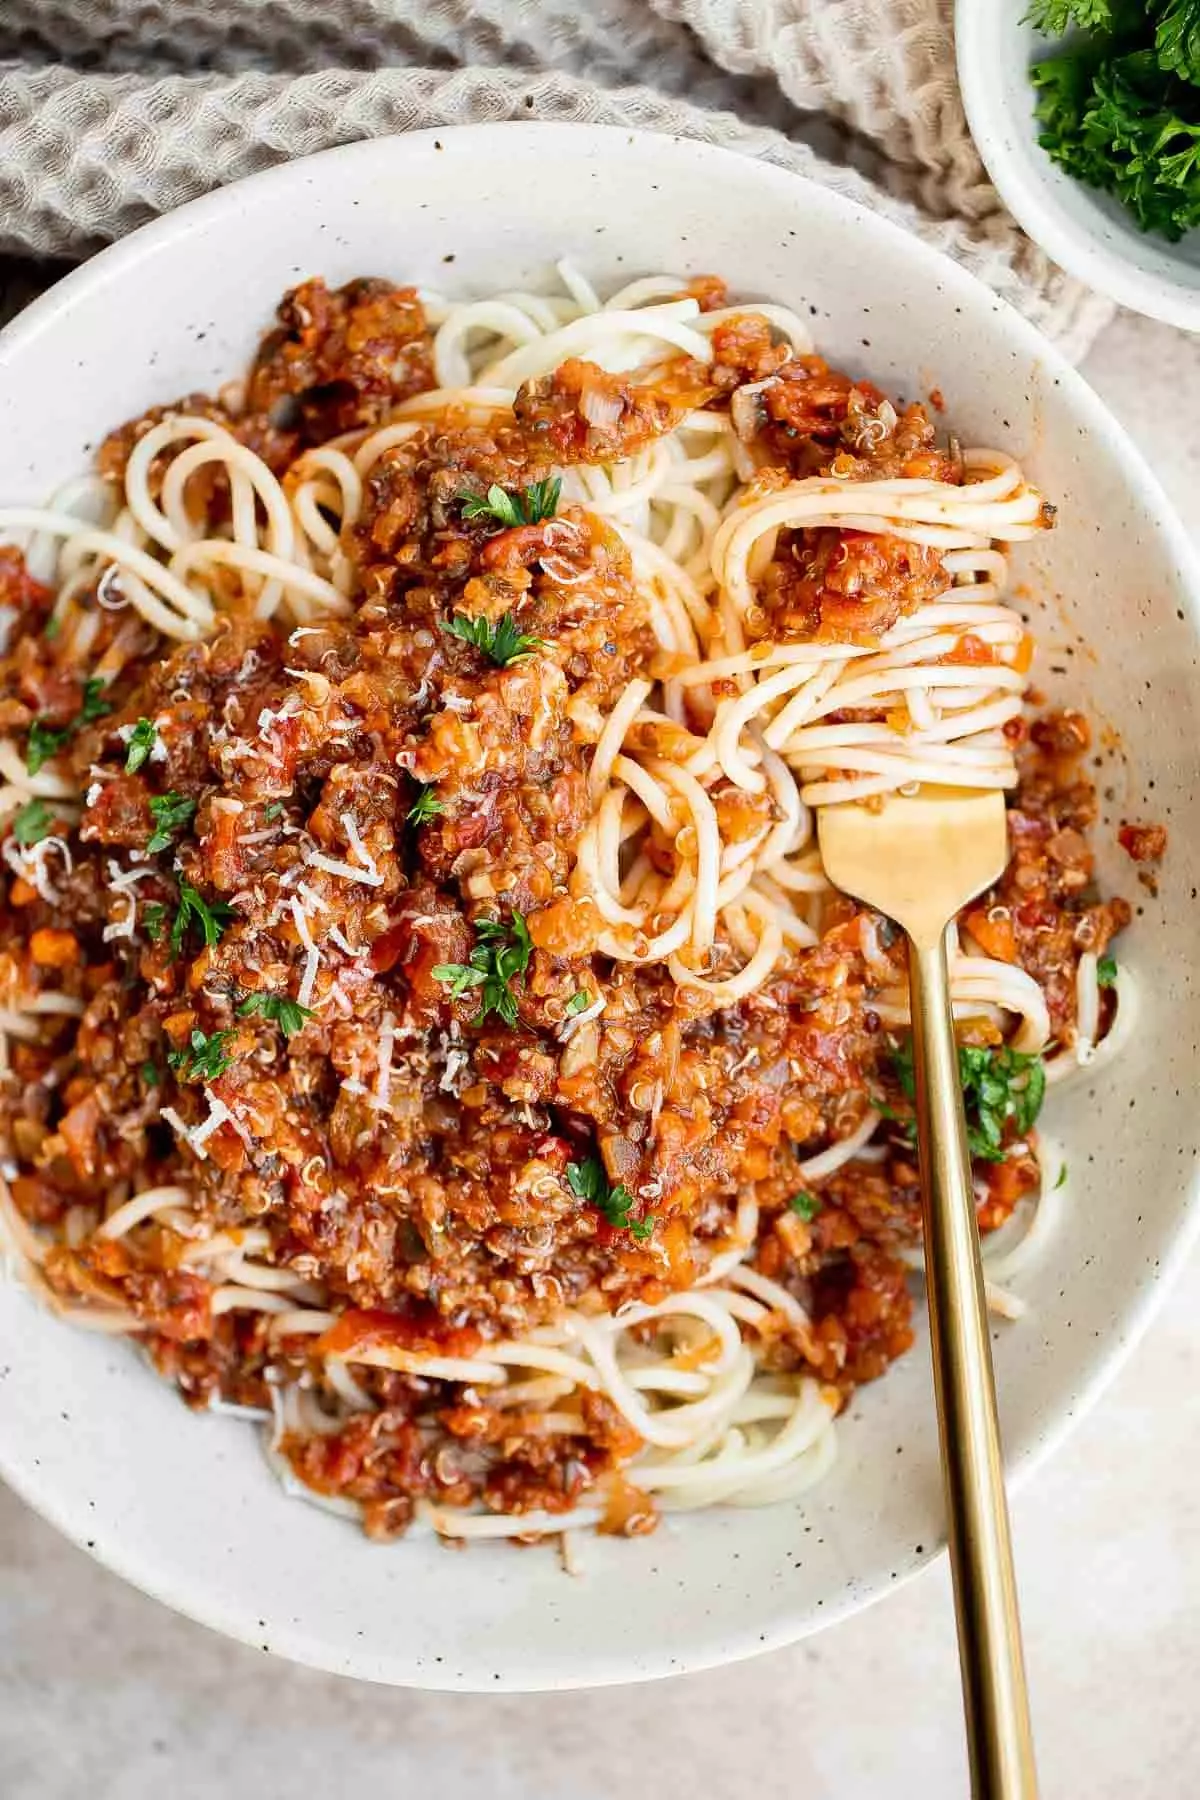 This Vegetarian Bolognese is a quick and easy vegetable-packed pasta with the flavor, texture, and goodness of a traditional Bolognese without the meat.